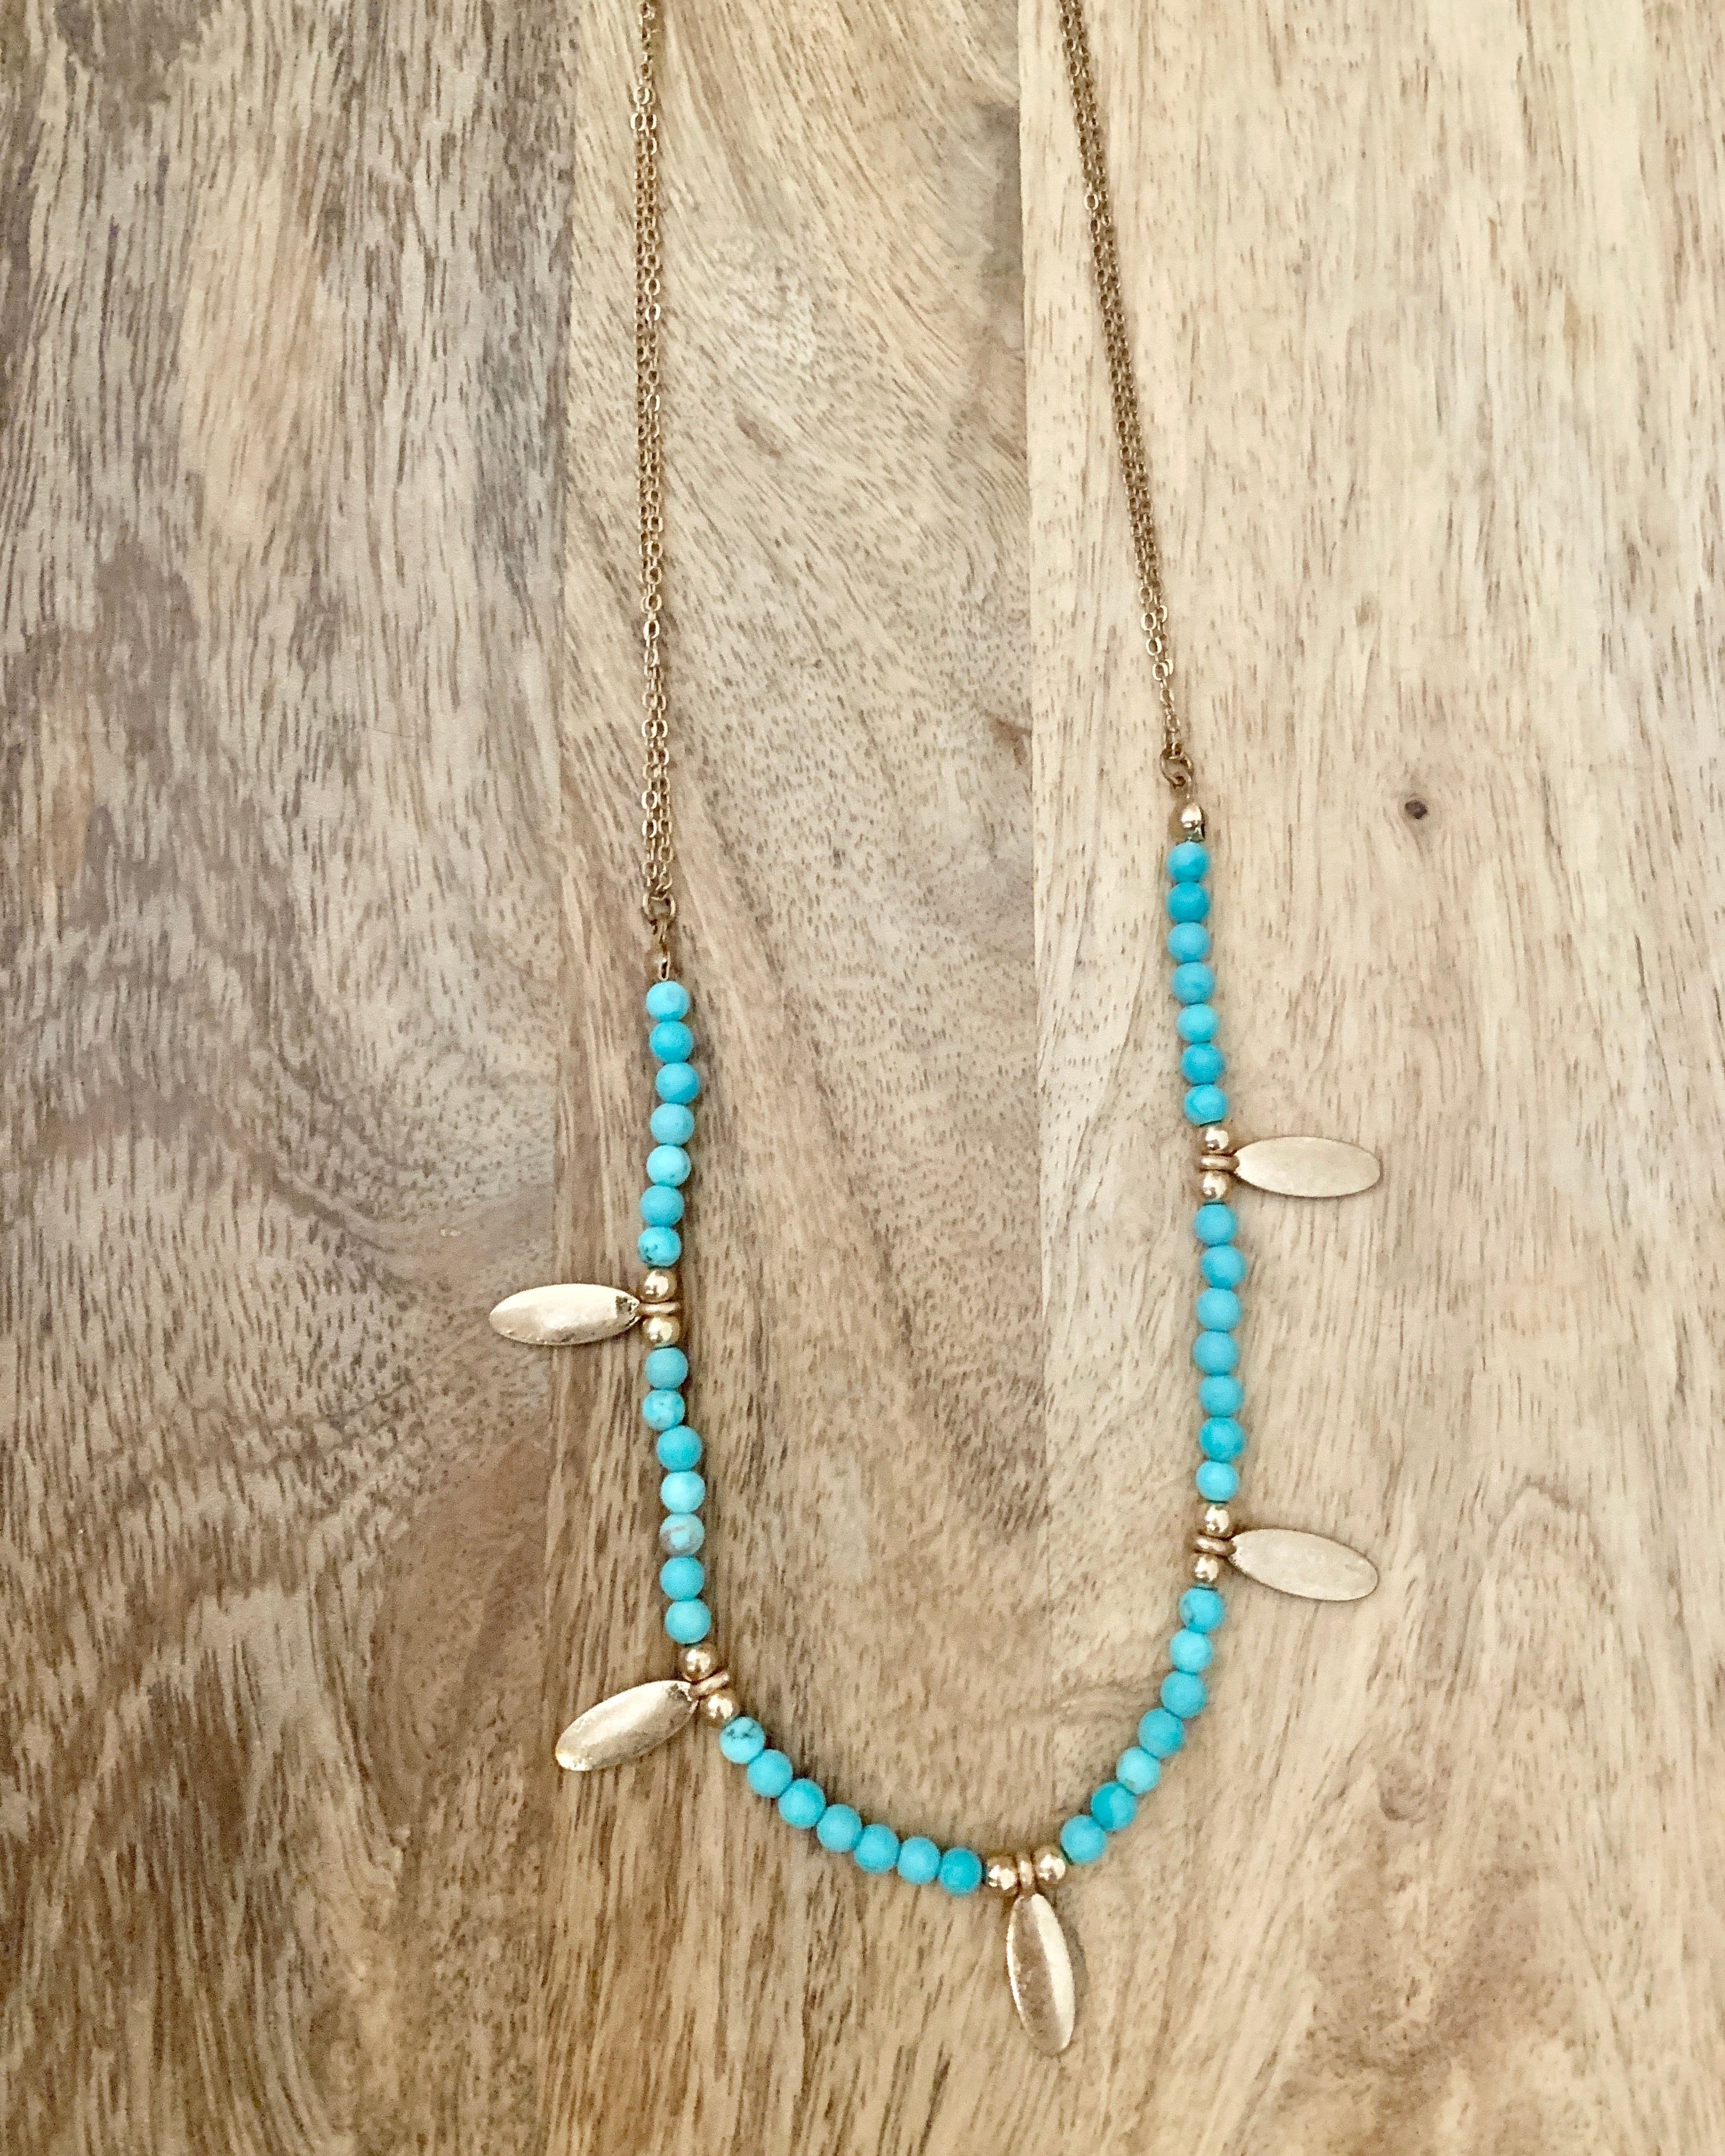 Gold & Turquoise Necklace.